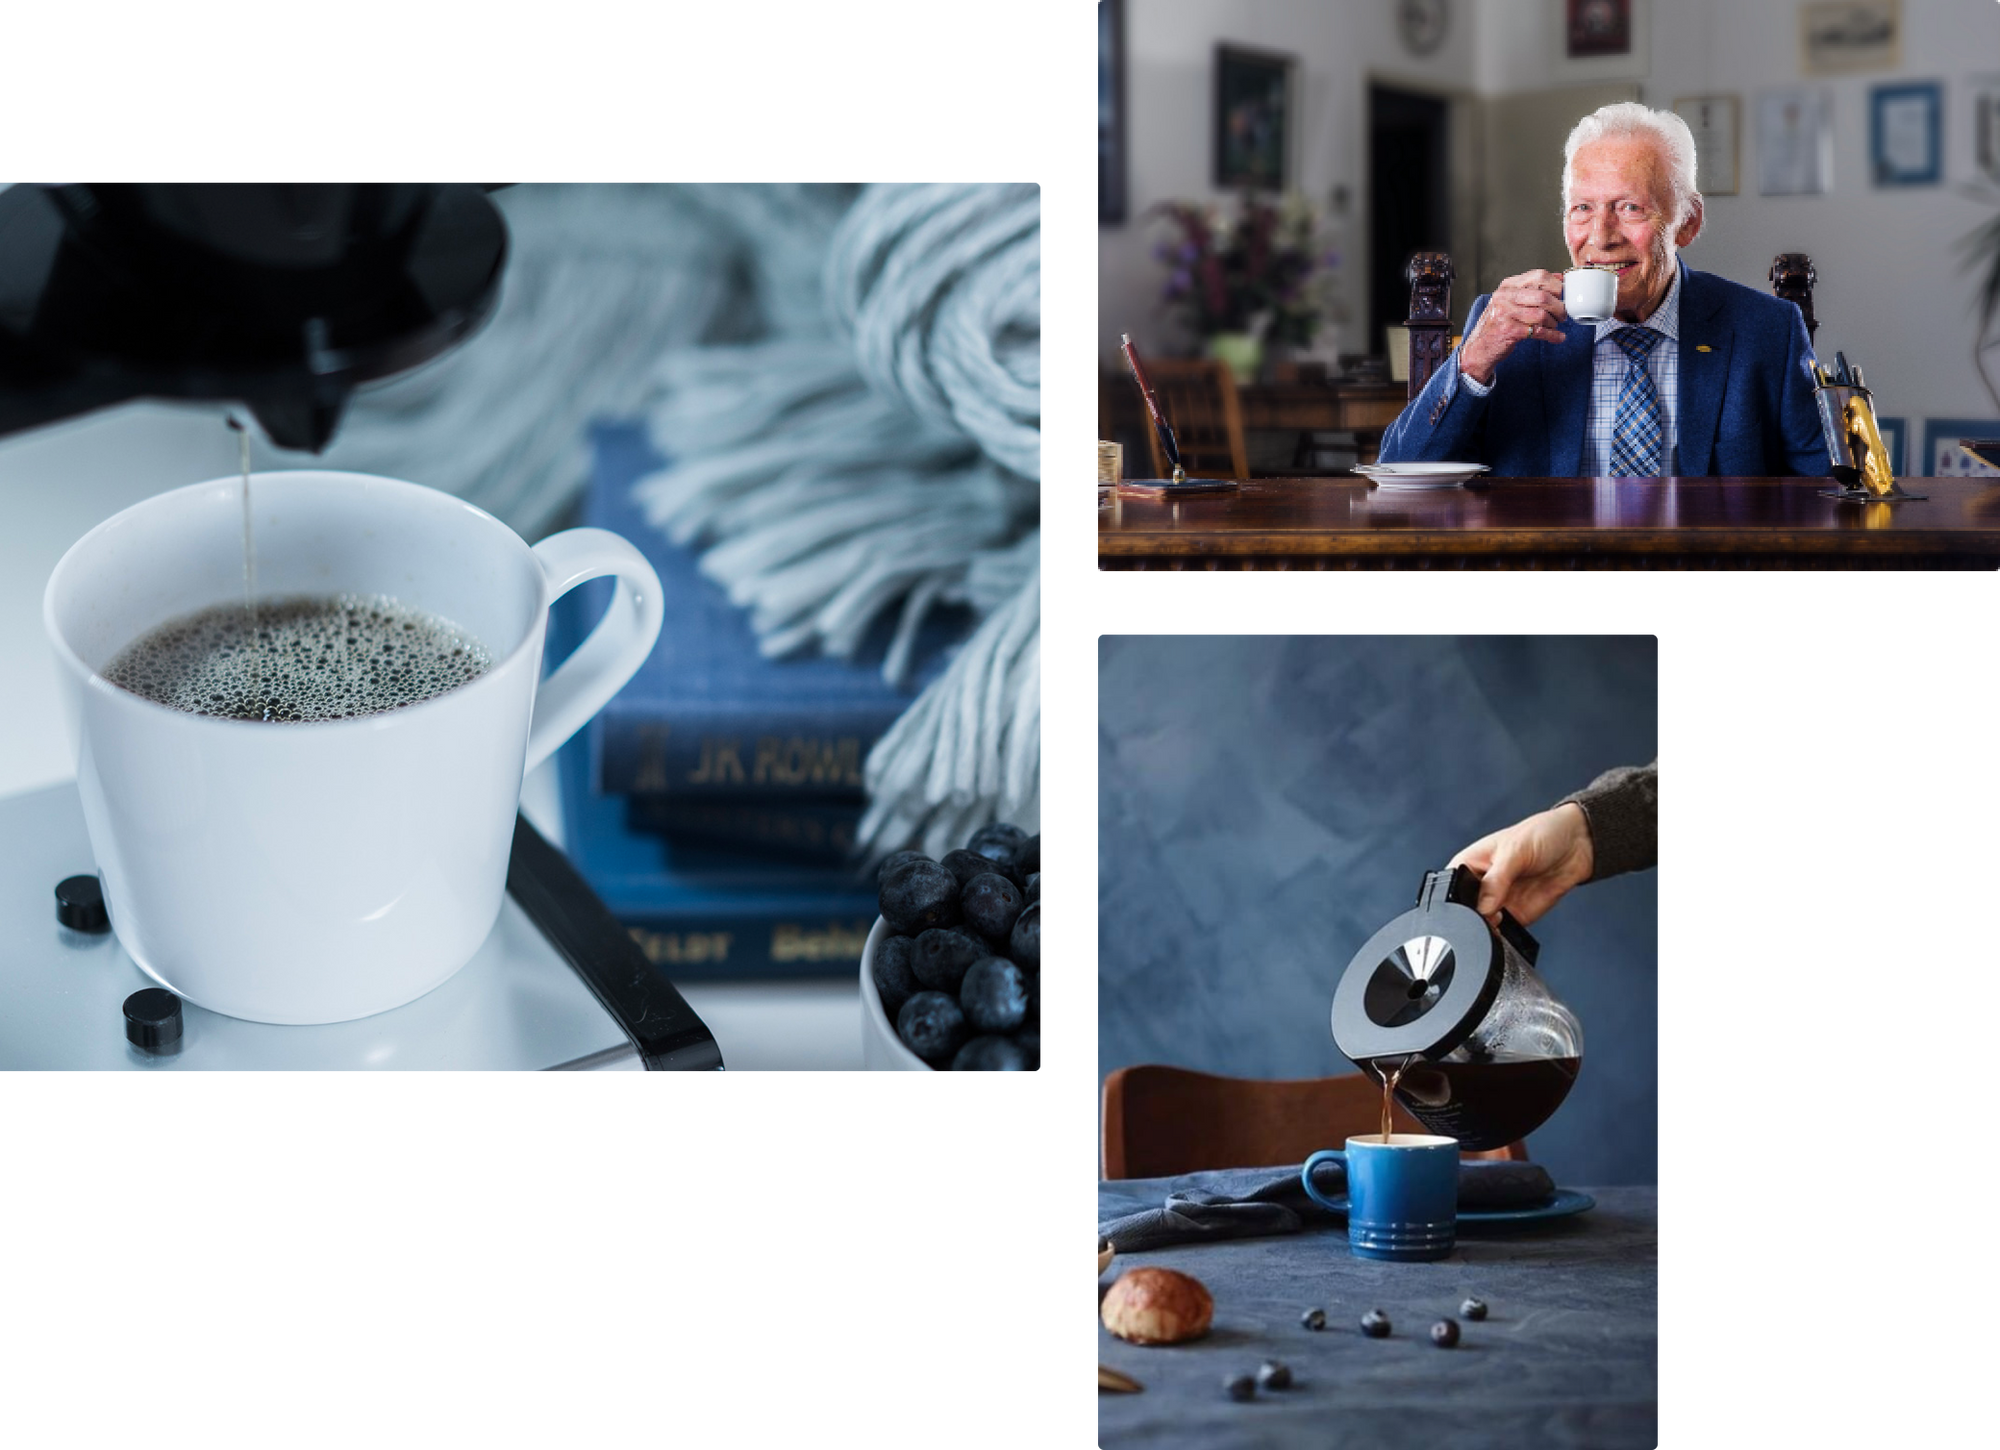 Images of a coffee mug, someone pouring a coffee from a carafe, and Moccamaster founder Gerard C. Smit.